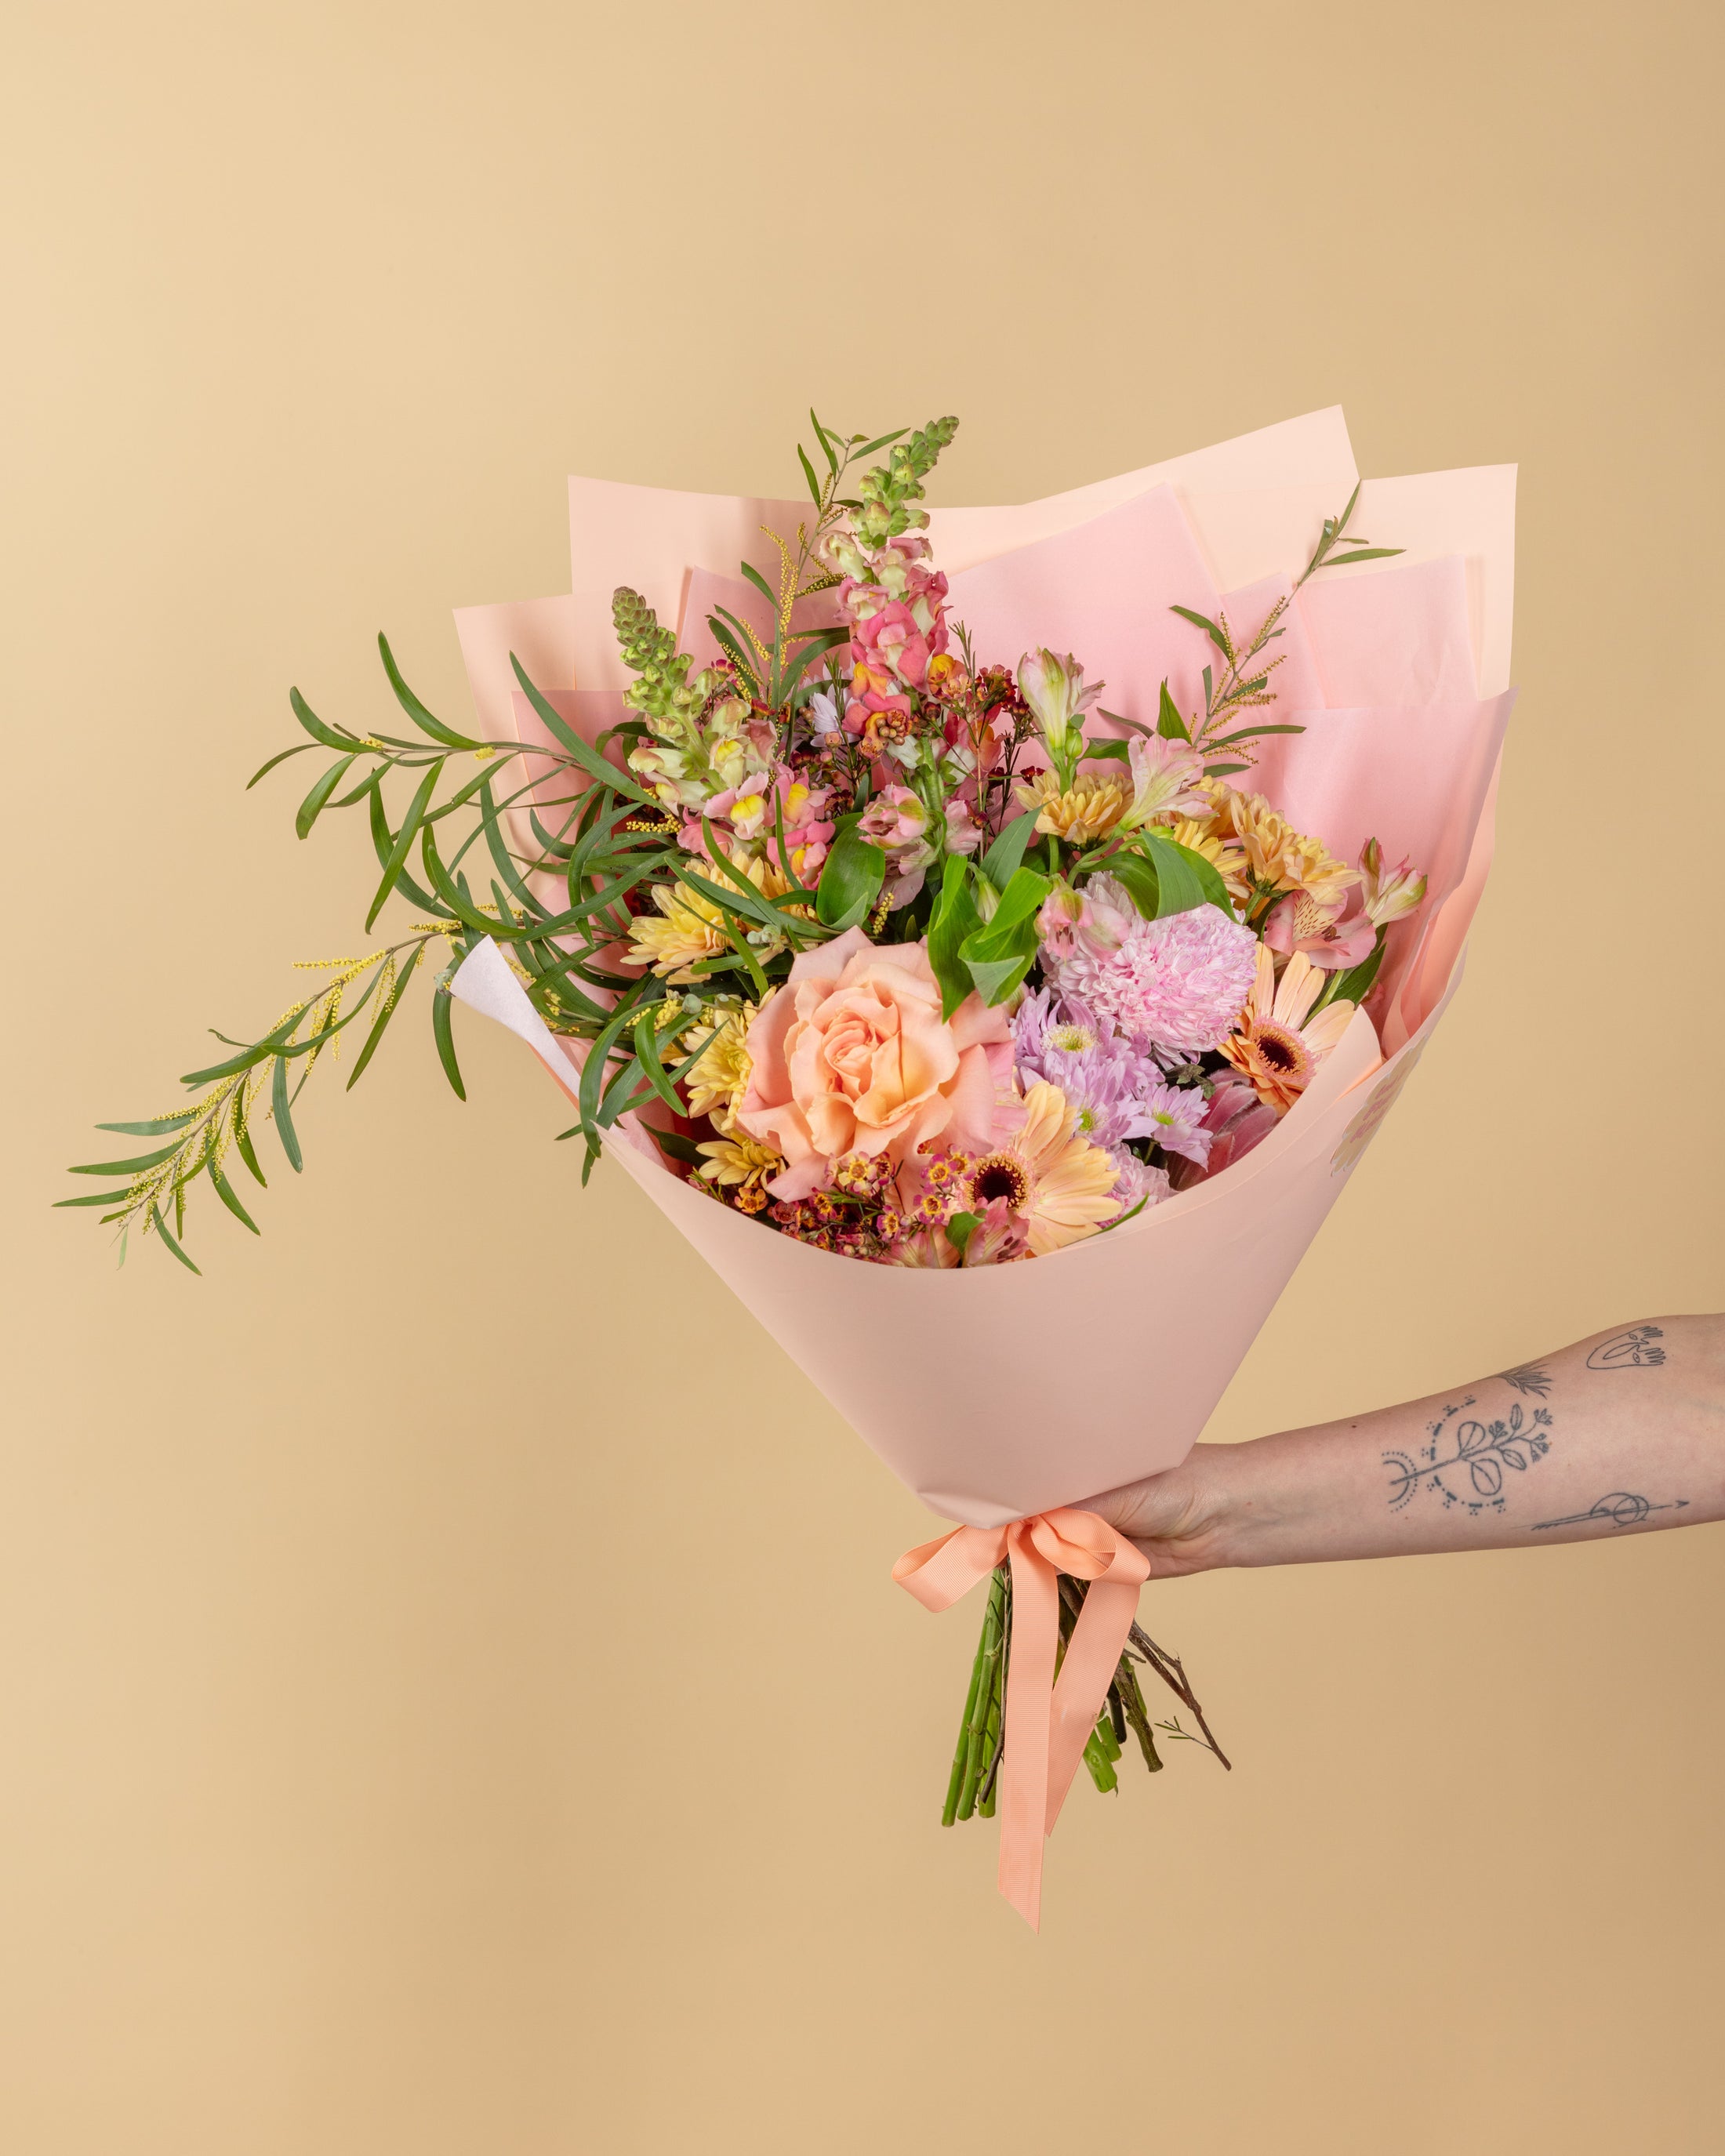 Prepaid Monthly Flower Subscription